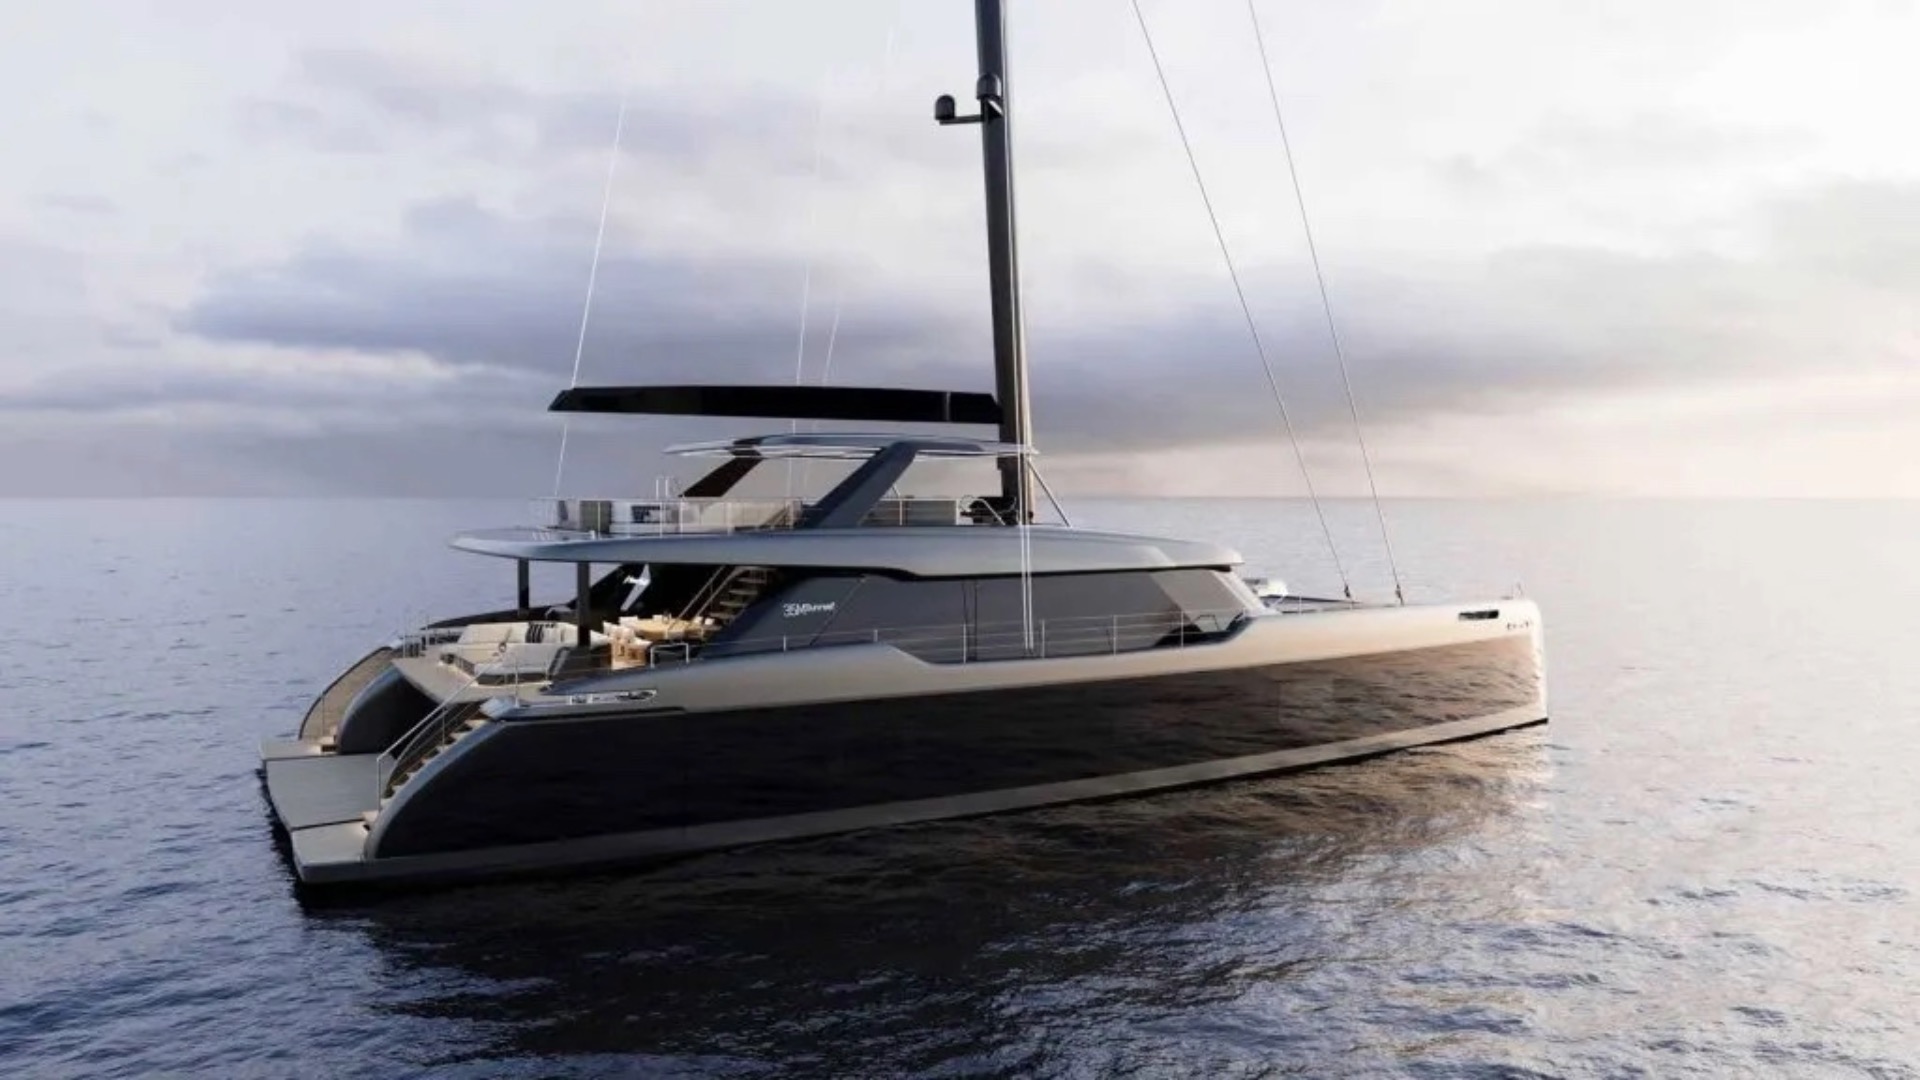 As per Robb Report, it is built using a “composite multihull.” It is outfitted with custom-designed batteries and advanced electric engines. The side of the hull consists of Sunreef’s patented “solar skin.” Apart from the hull, the solar panel will also be outfitted on the superstructure (main deckhouse), and bimini (a retractable sunshade). This solar skin allows the catamaran to generate clean electricity directly from the sun. Sunreef has successfully applied its solar technology to various models, including the Explorer Eco 40, Eco 100, Zero Cat, and 80 Power Eco.